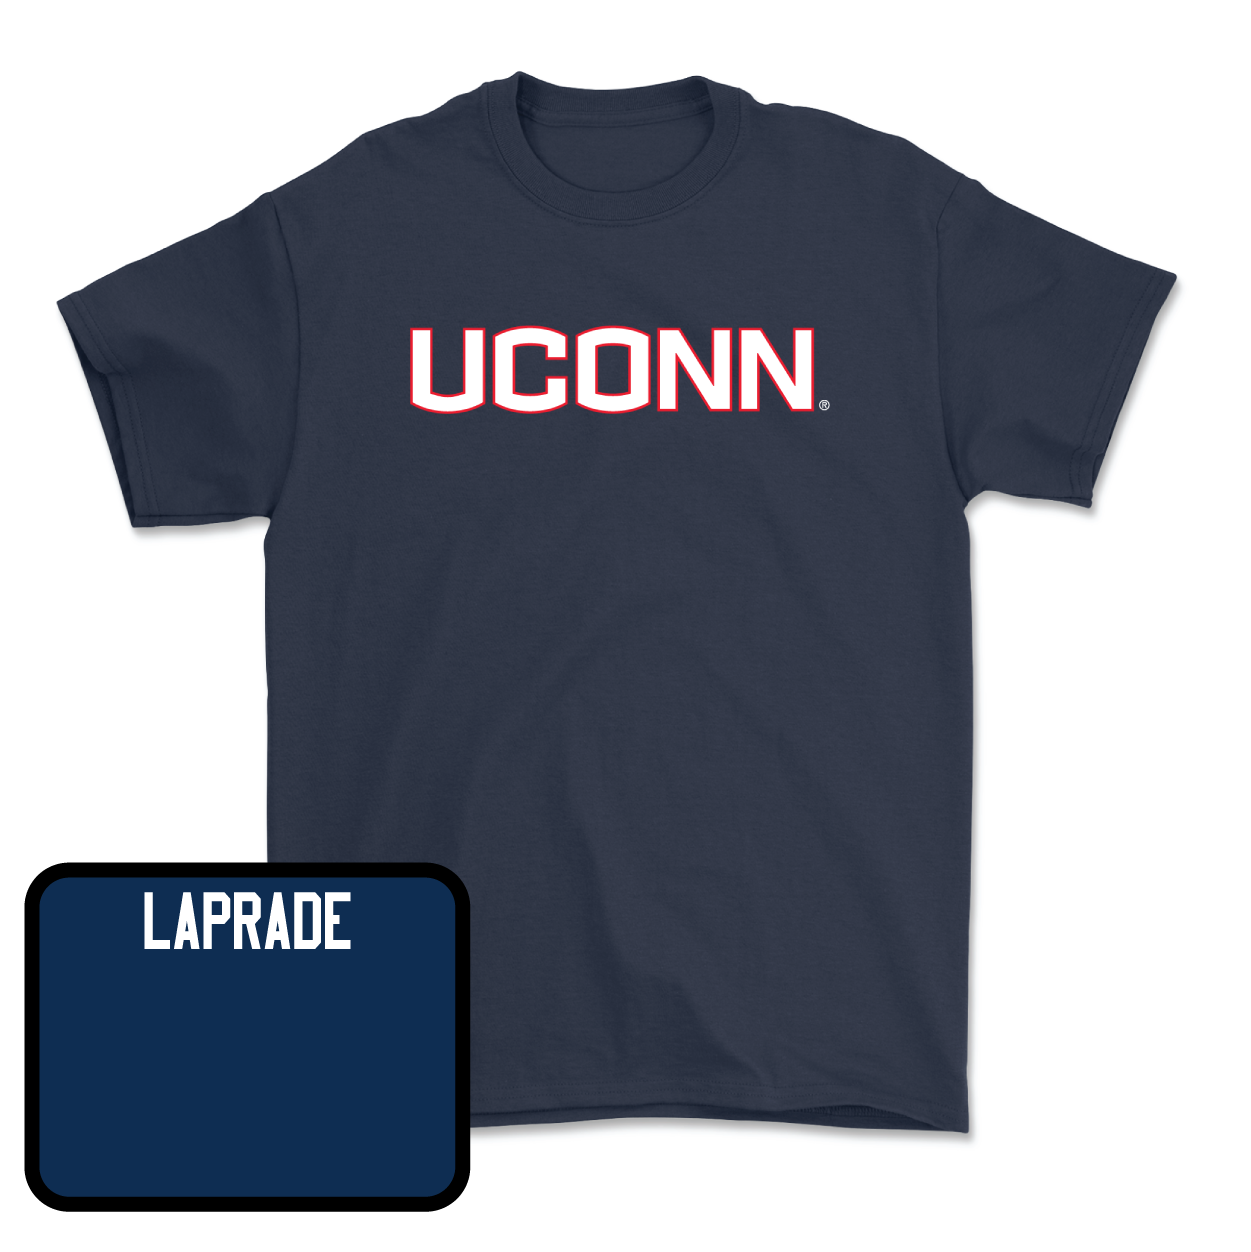 Navy Women's Rowing UConn Tee Youth Small / Madelyn Laprade